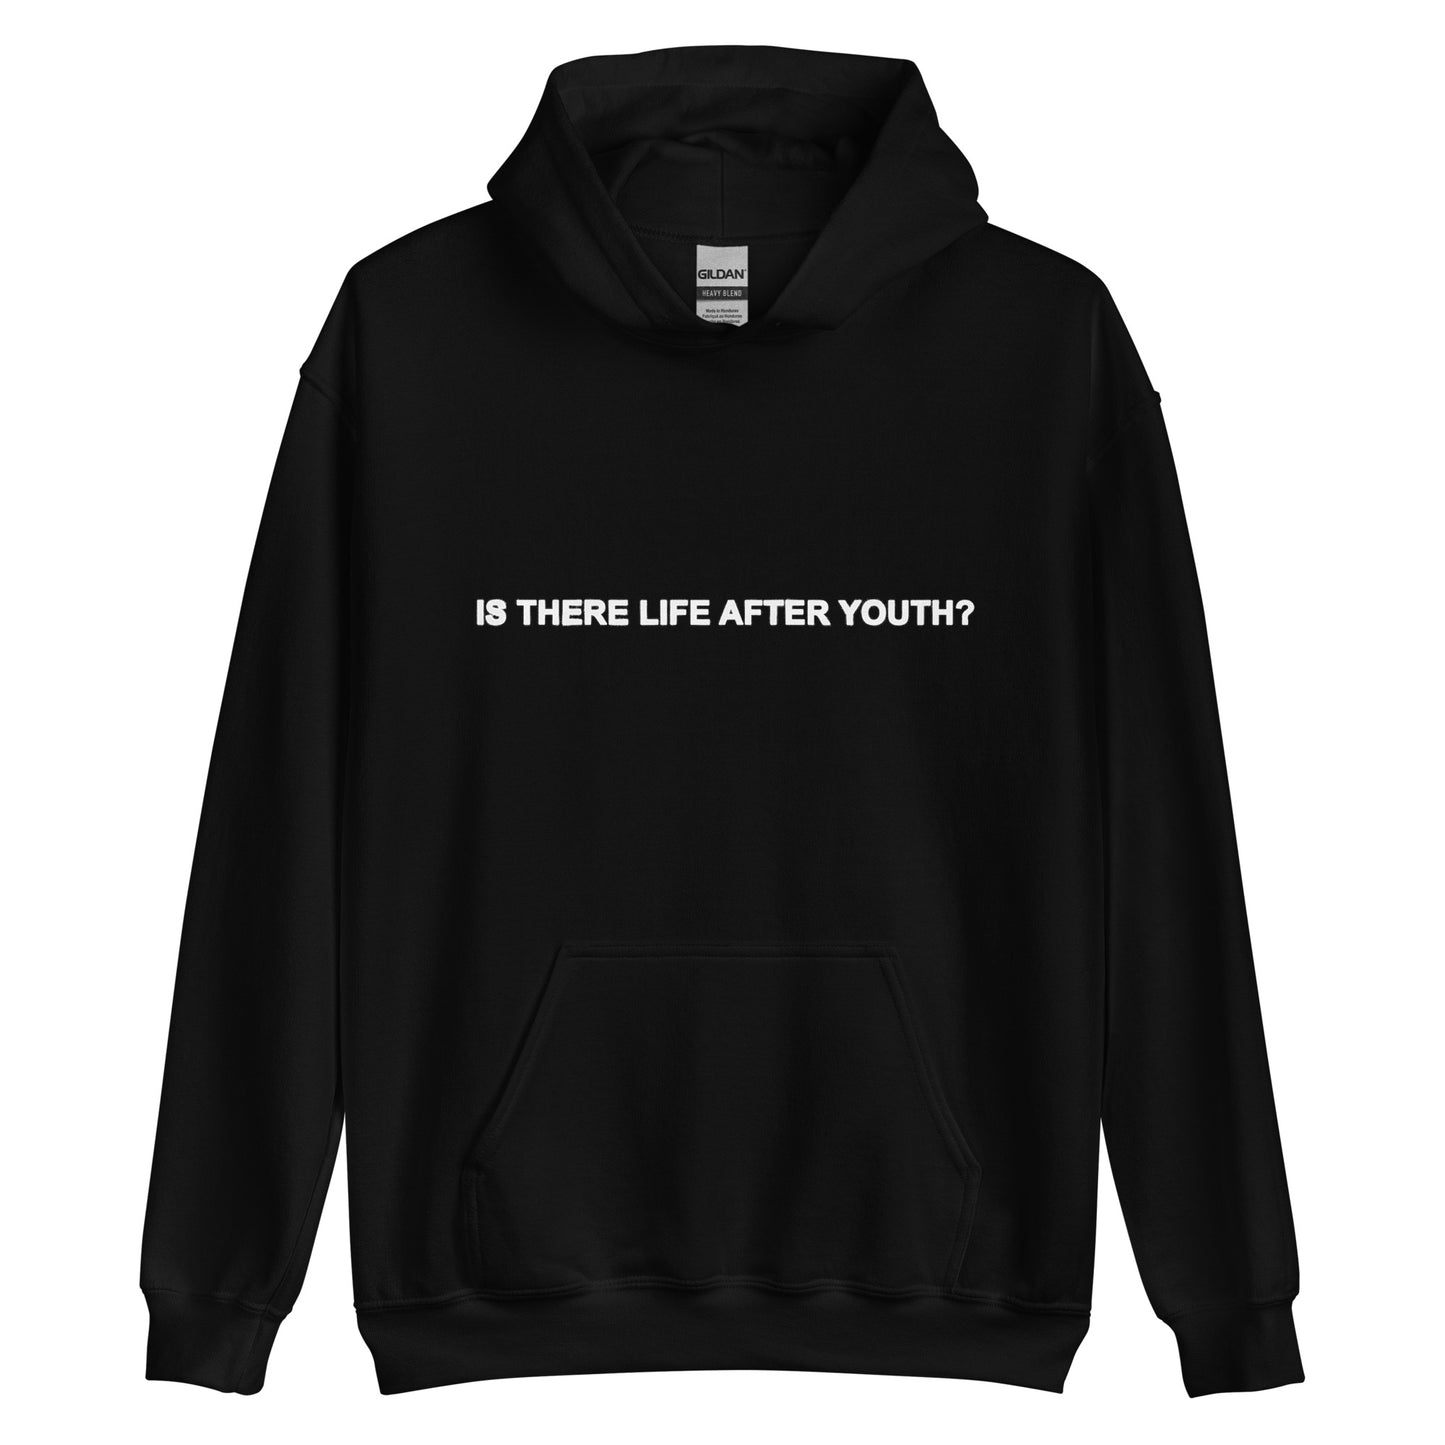 is there life after youth? hoodie